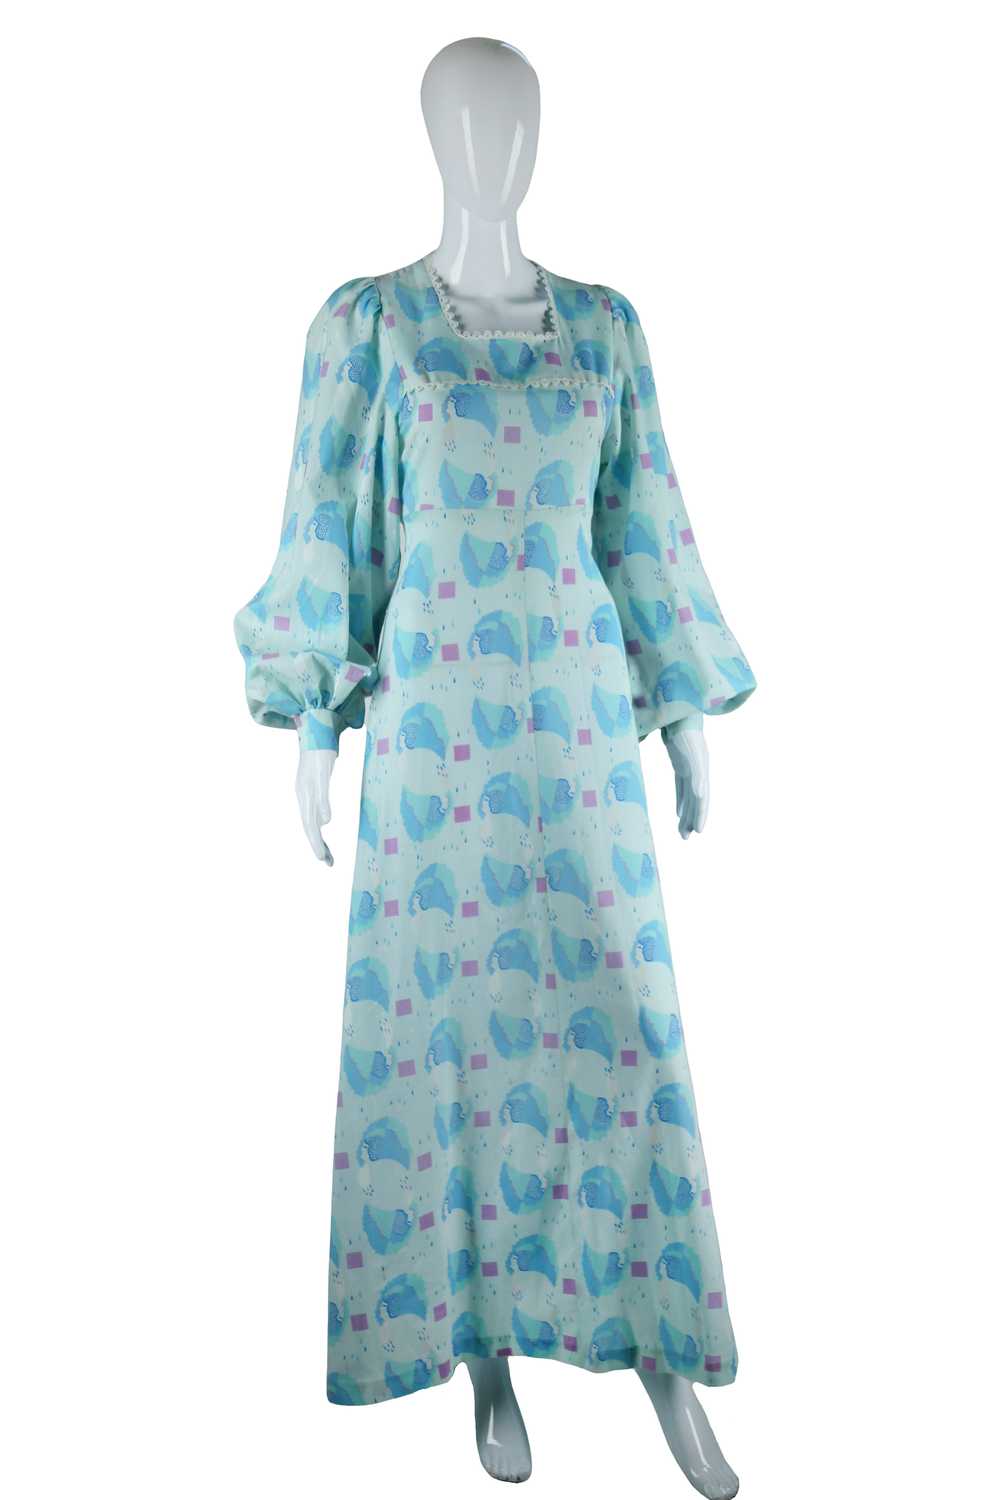 Raindrops and Faces in Profile Novelty Print Maxi… - image 2